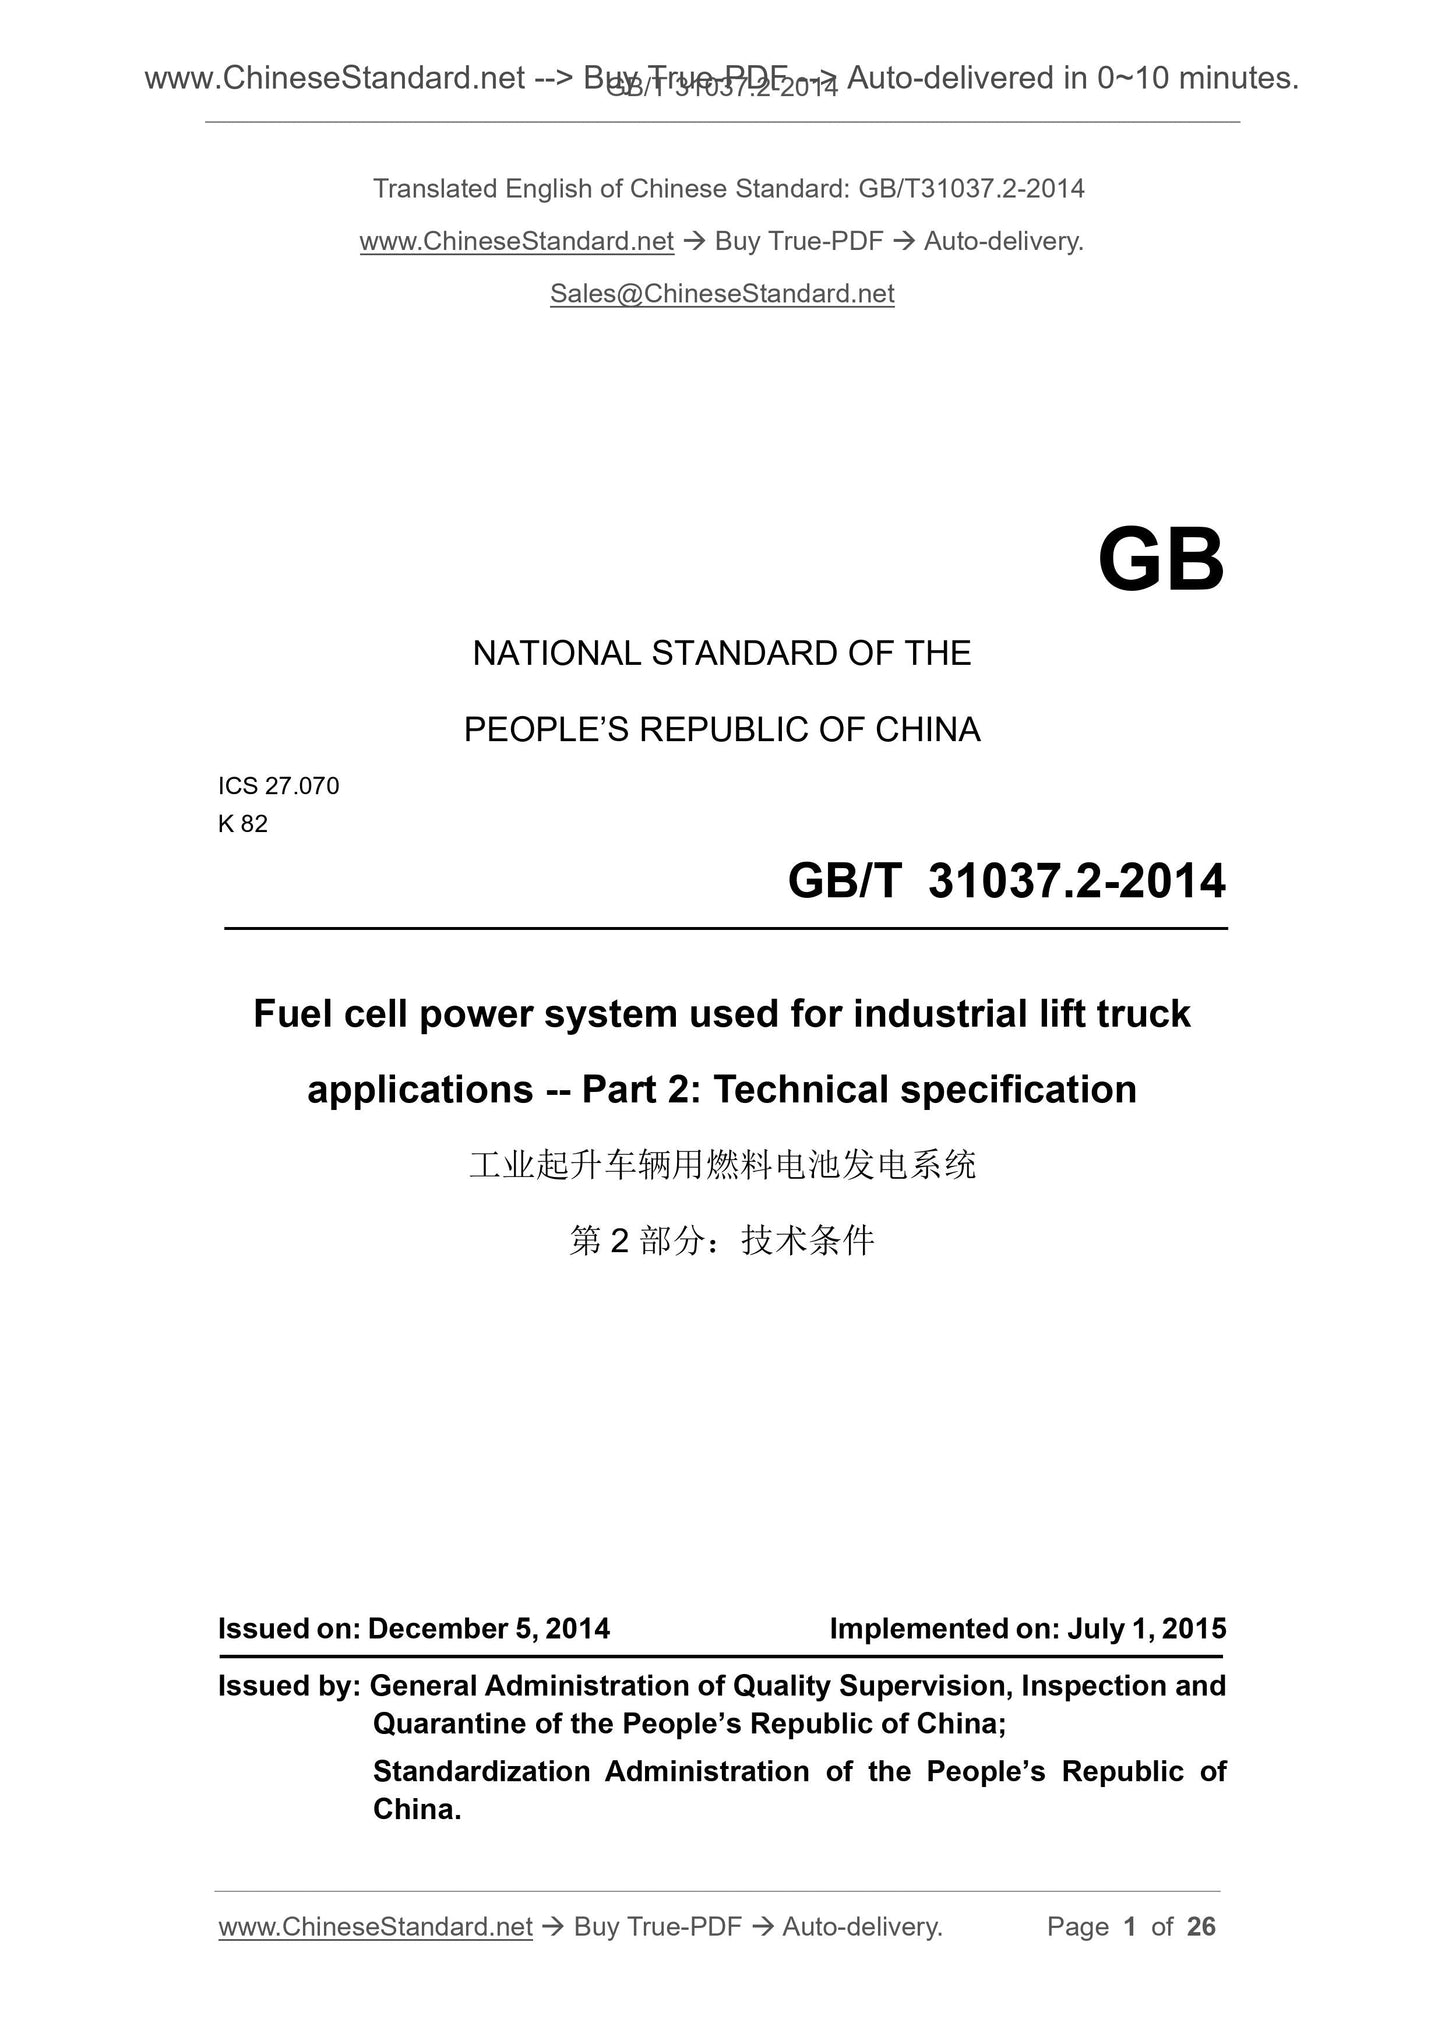 GB/T 31037.2-2014 Page 1